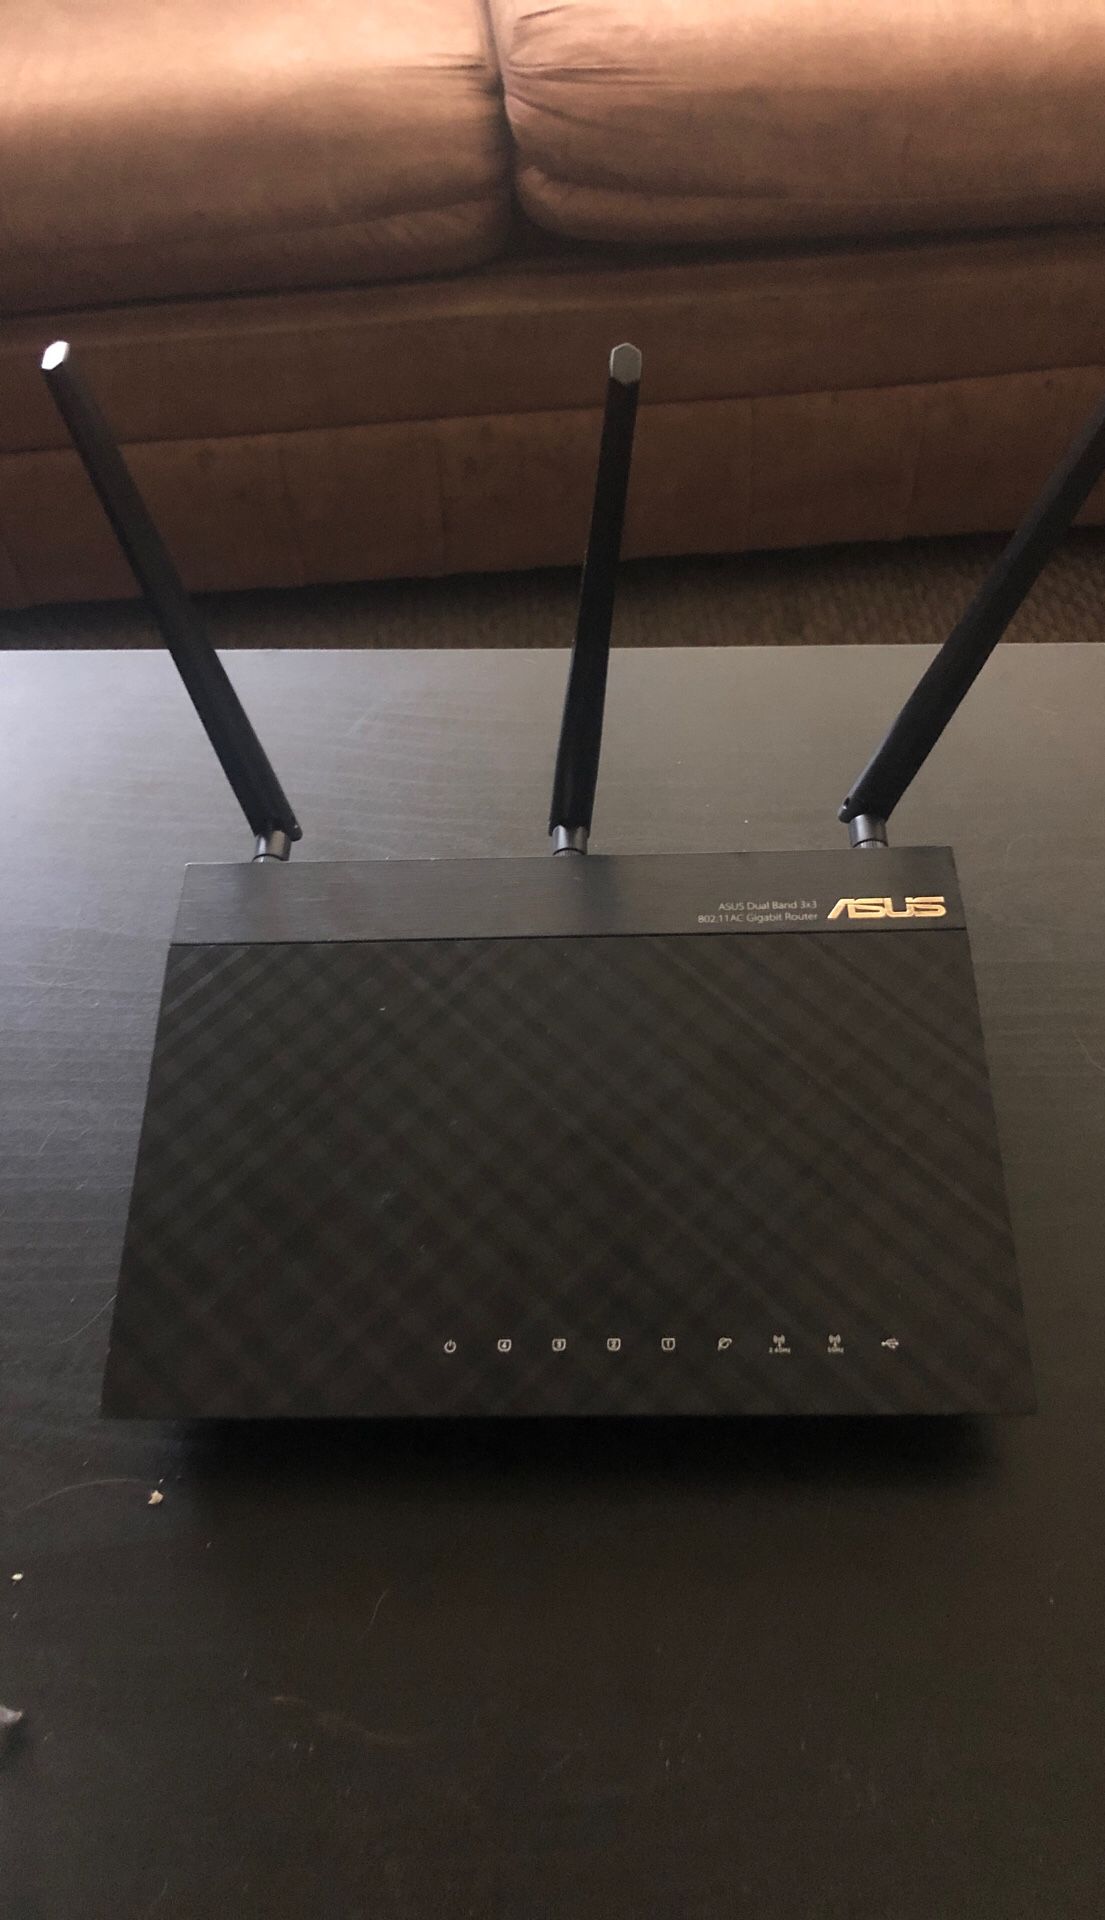 Asus Router model RT-AC66R